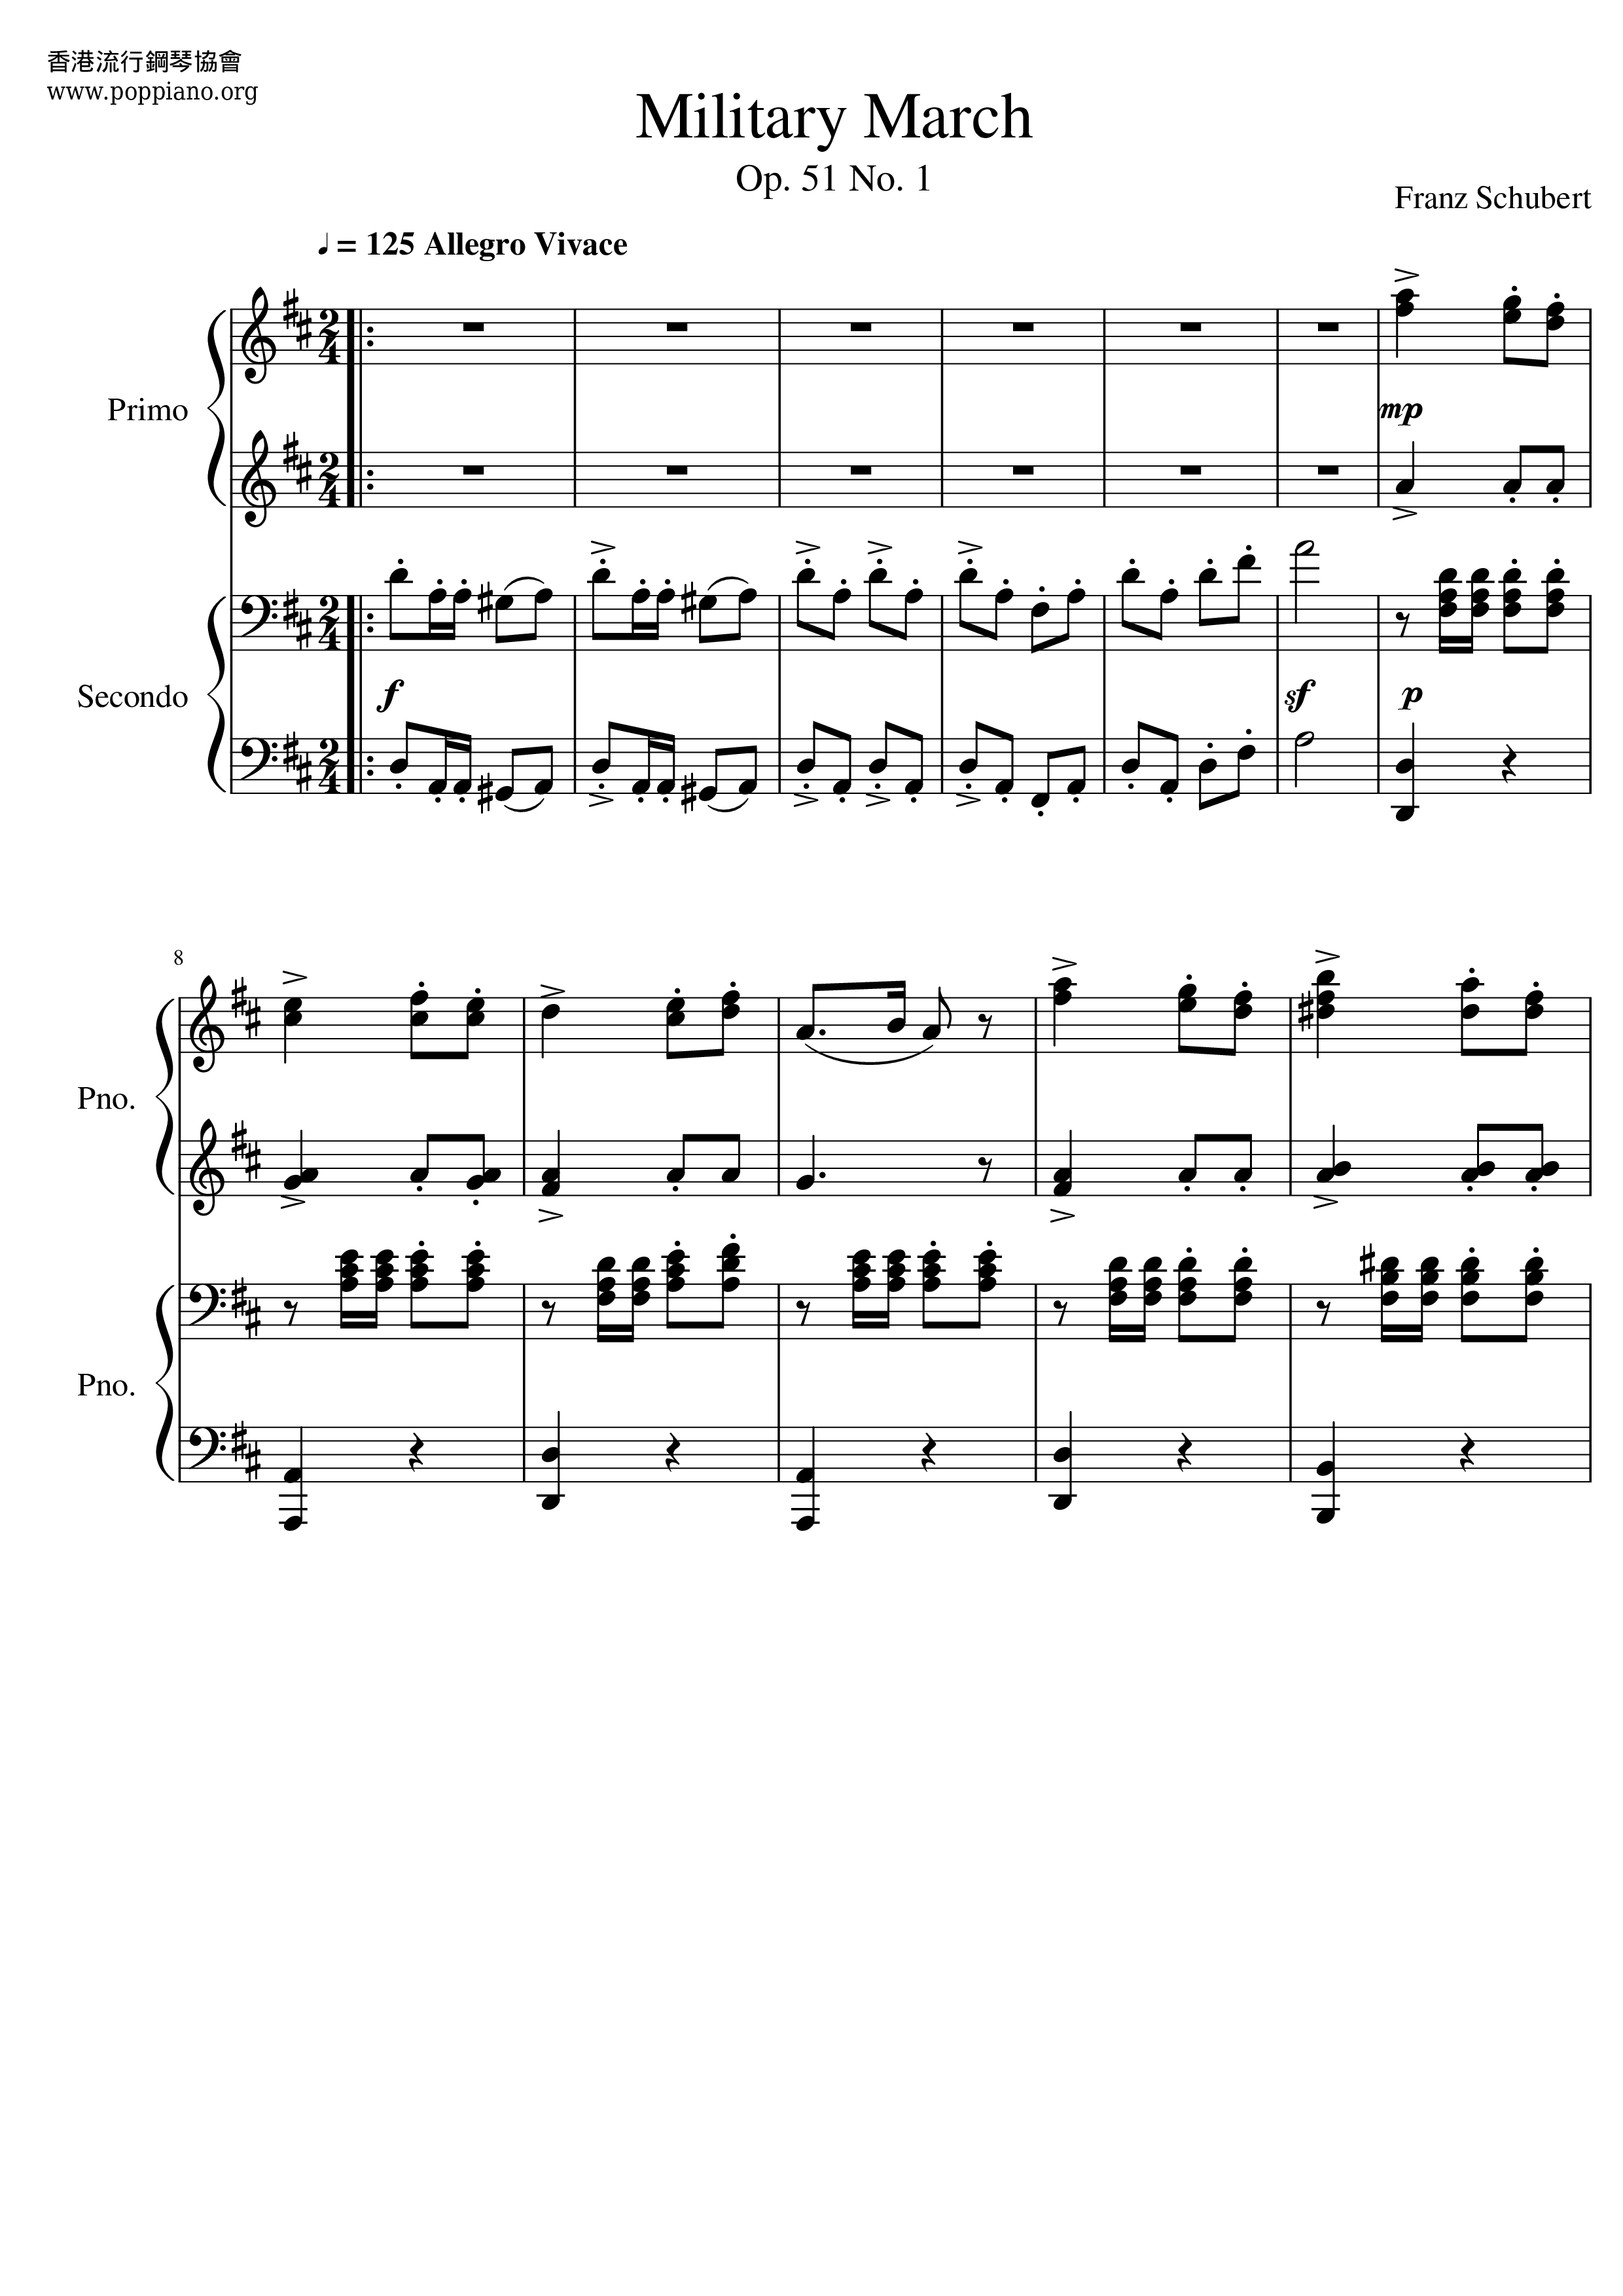 Military March Op.51, No.1ピアノ譜